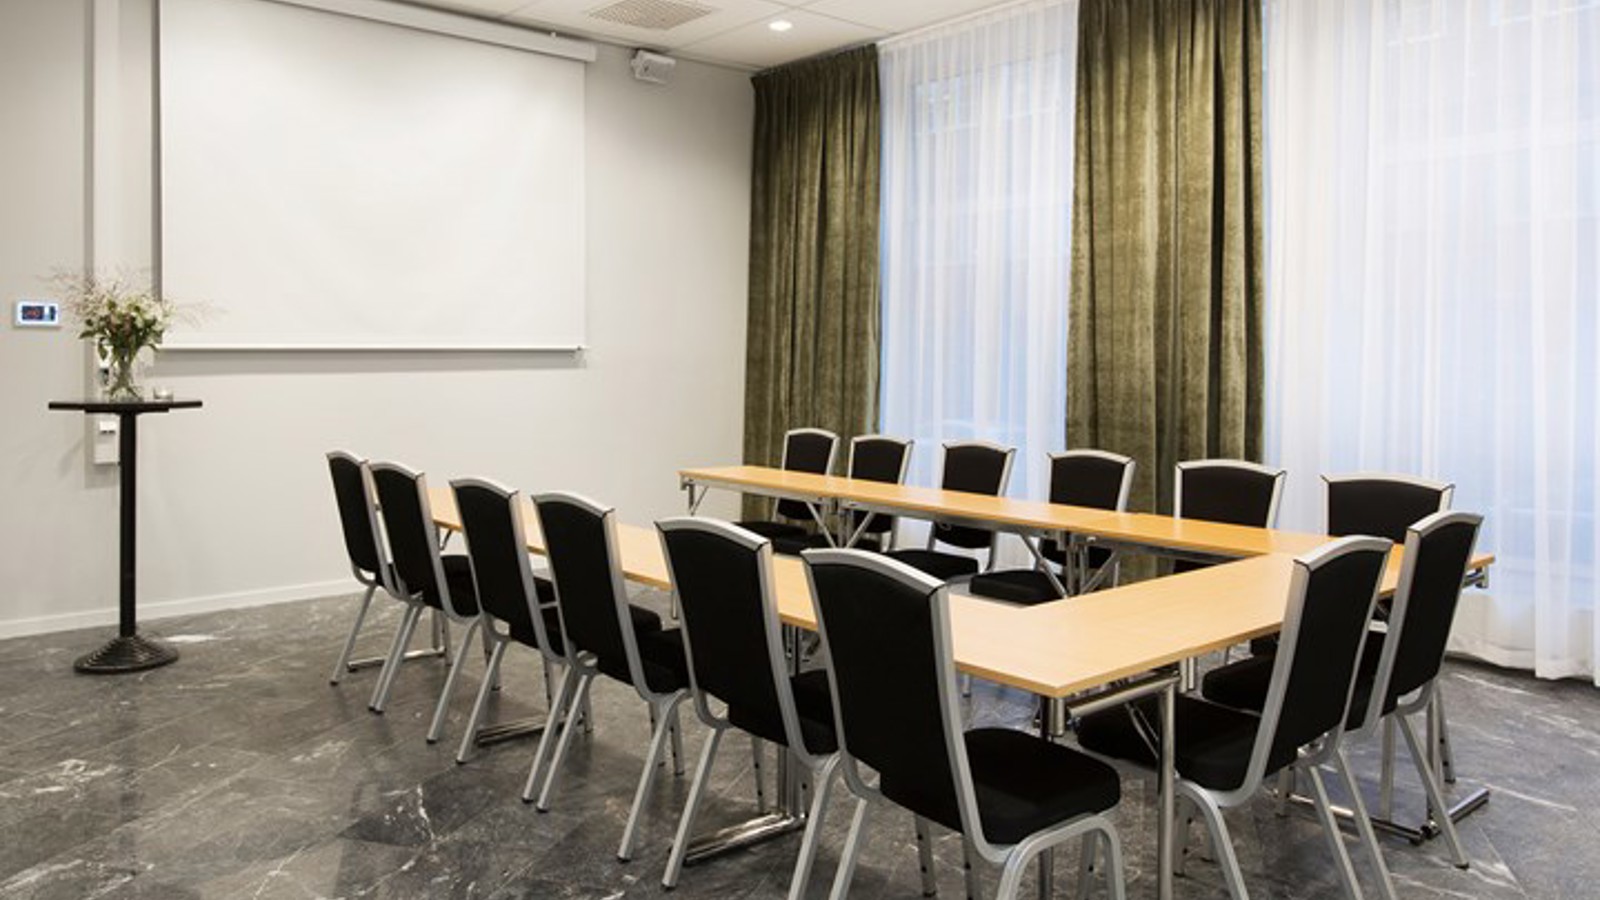 Conference room with u-shaped seating, wooden table, black chairs and green curtains